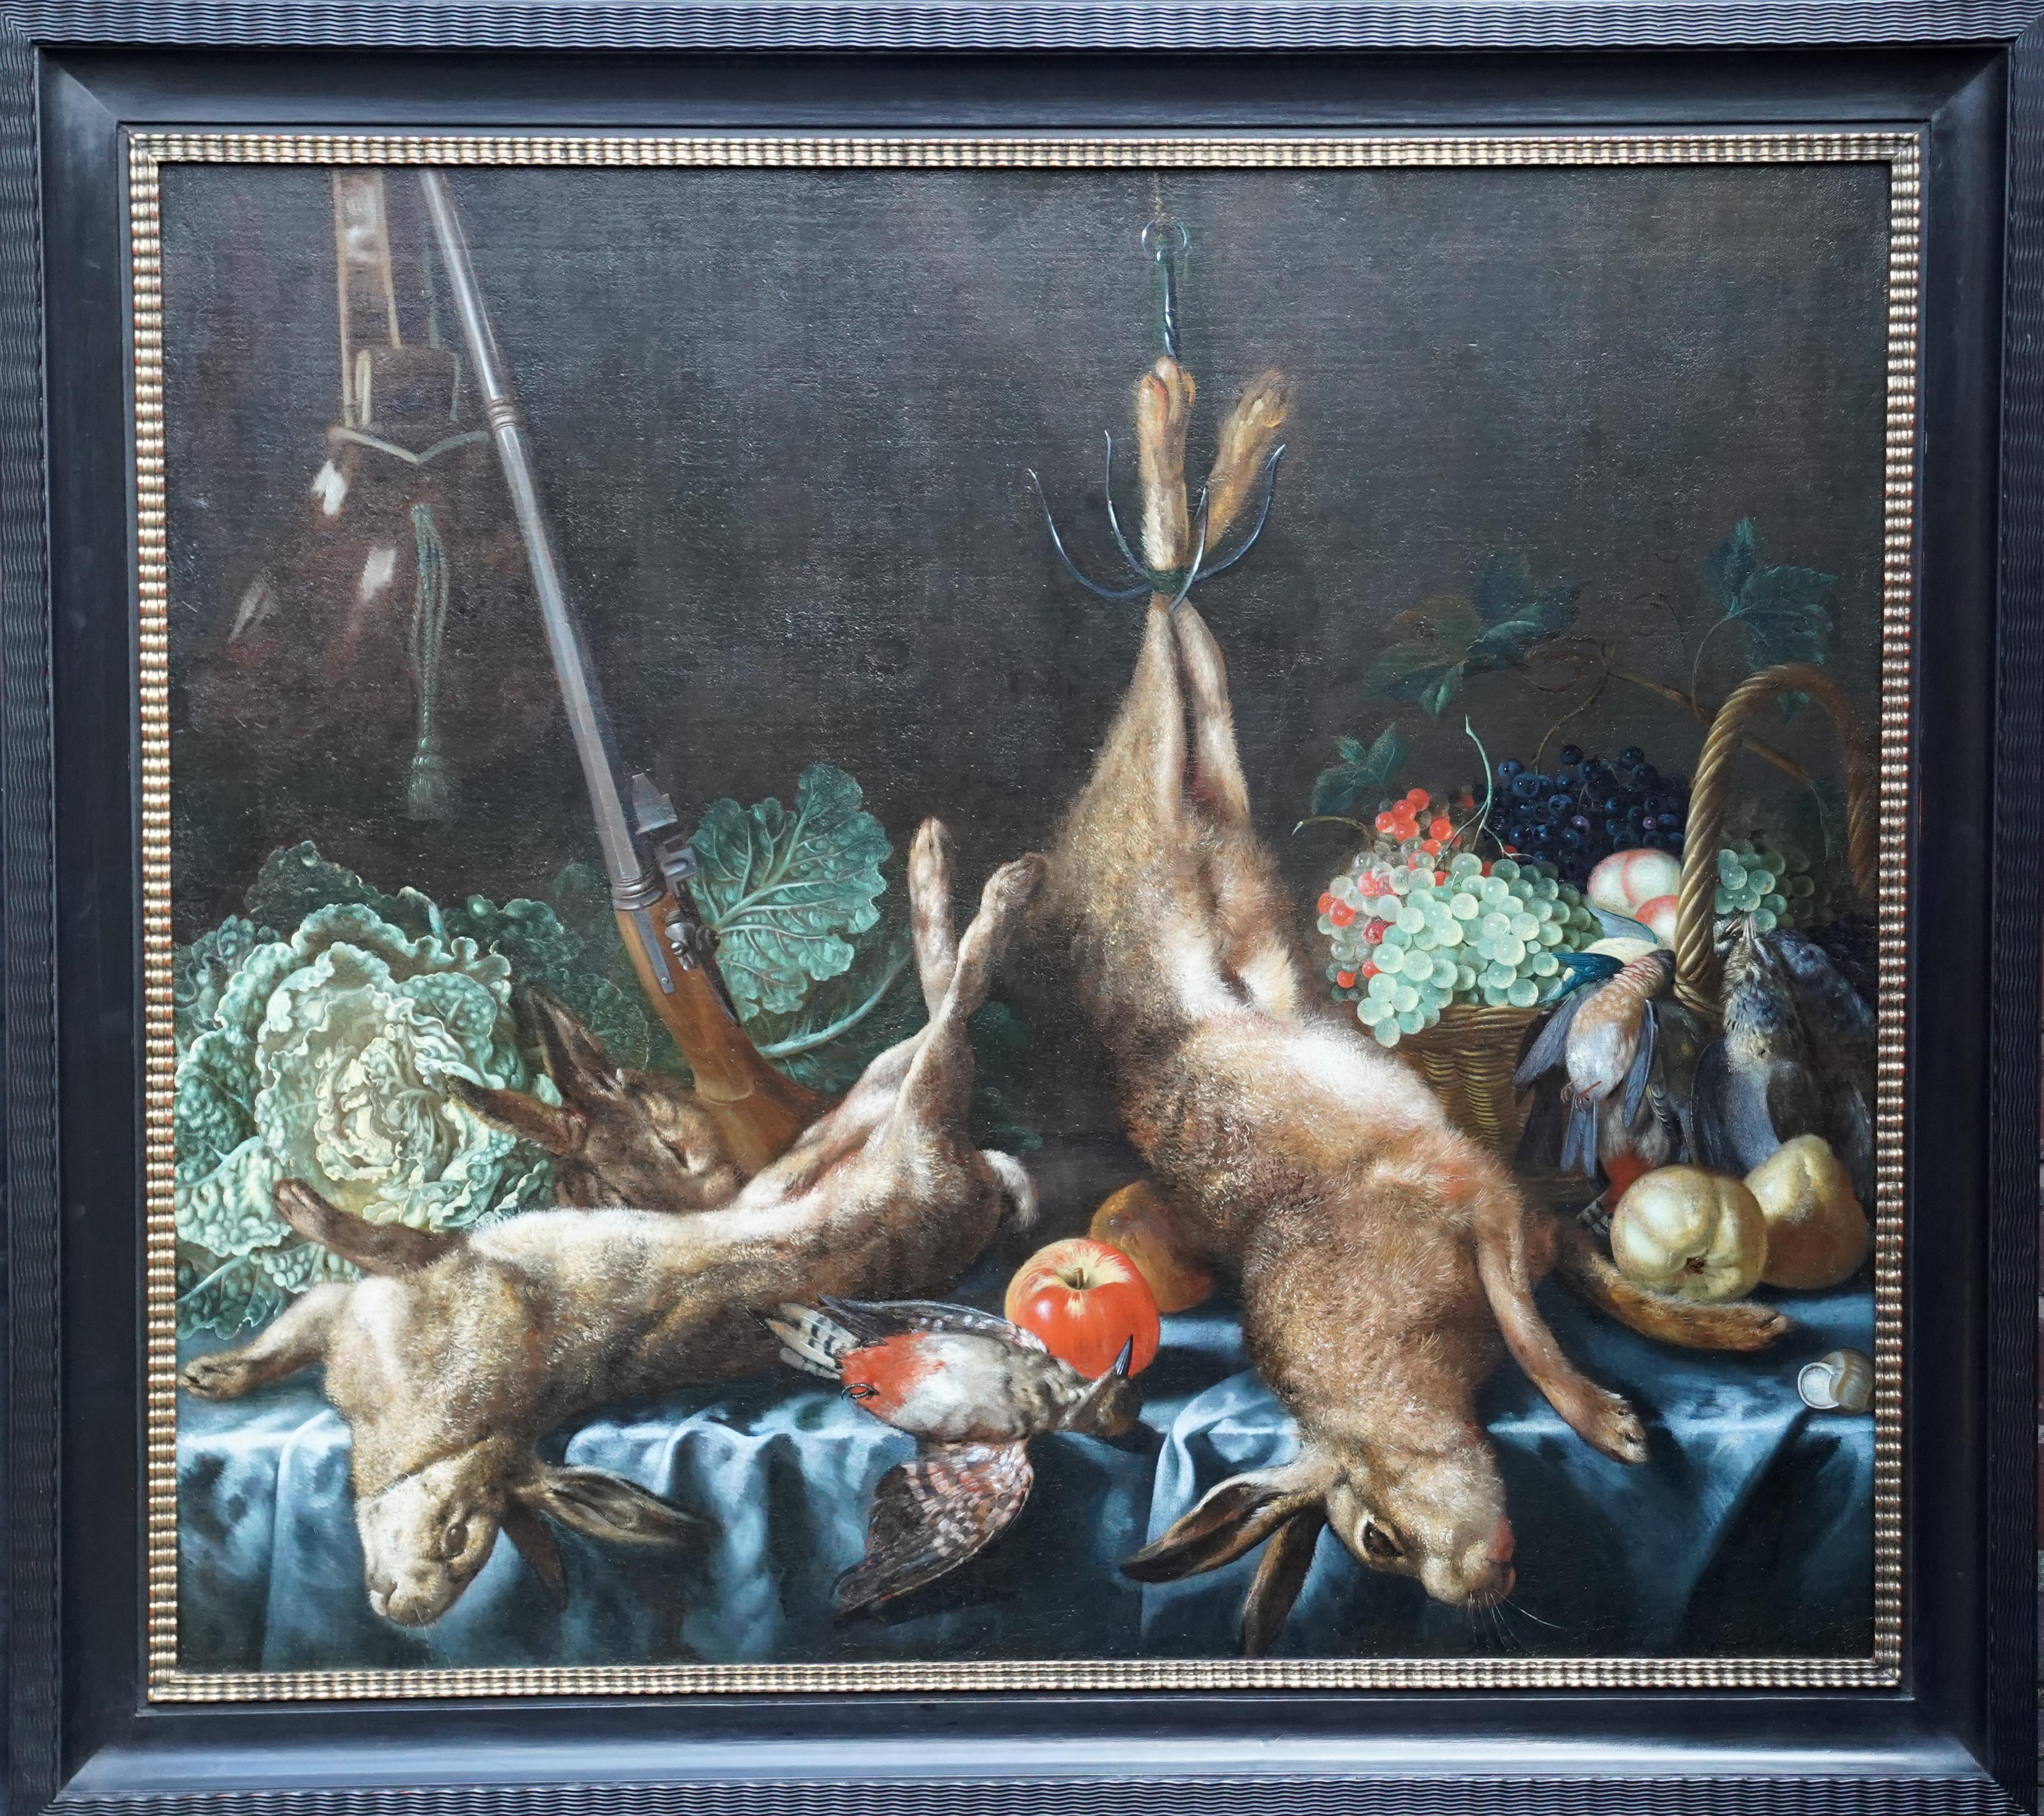 Still Life with Game, Fruit and Veg - Flemish 17thC Old Master art oil painting For Sale 8